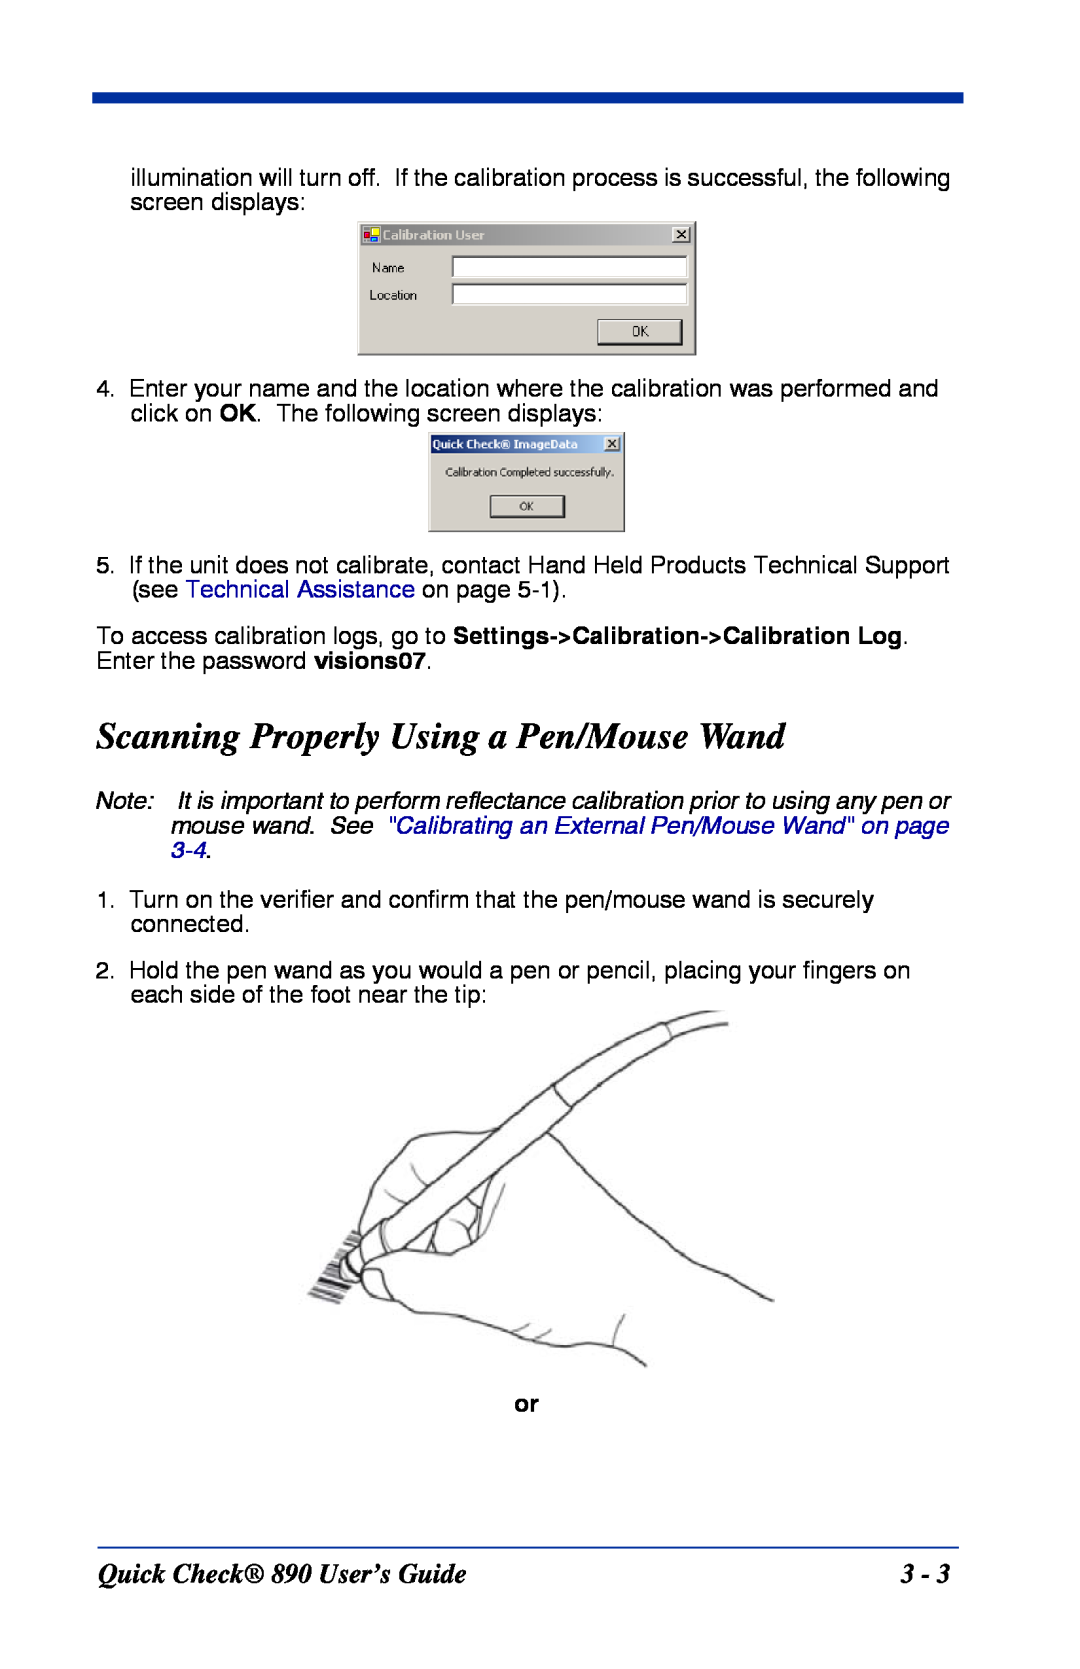 HandHeld Entertainment manual Scanning Properly Using a Pen/Mouse Wand, Quick Check 890 User’s Guide 